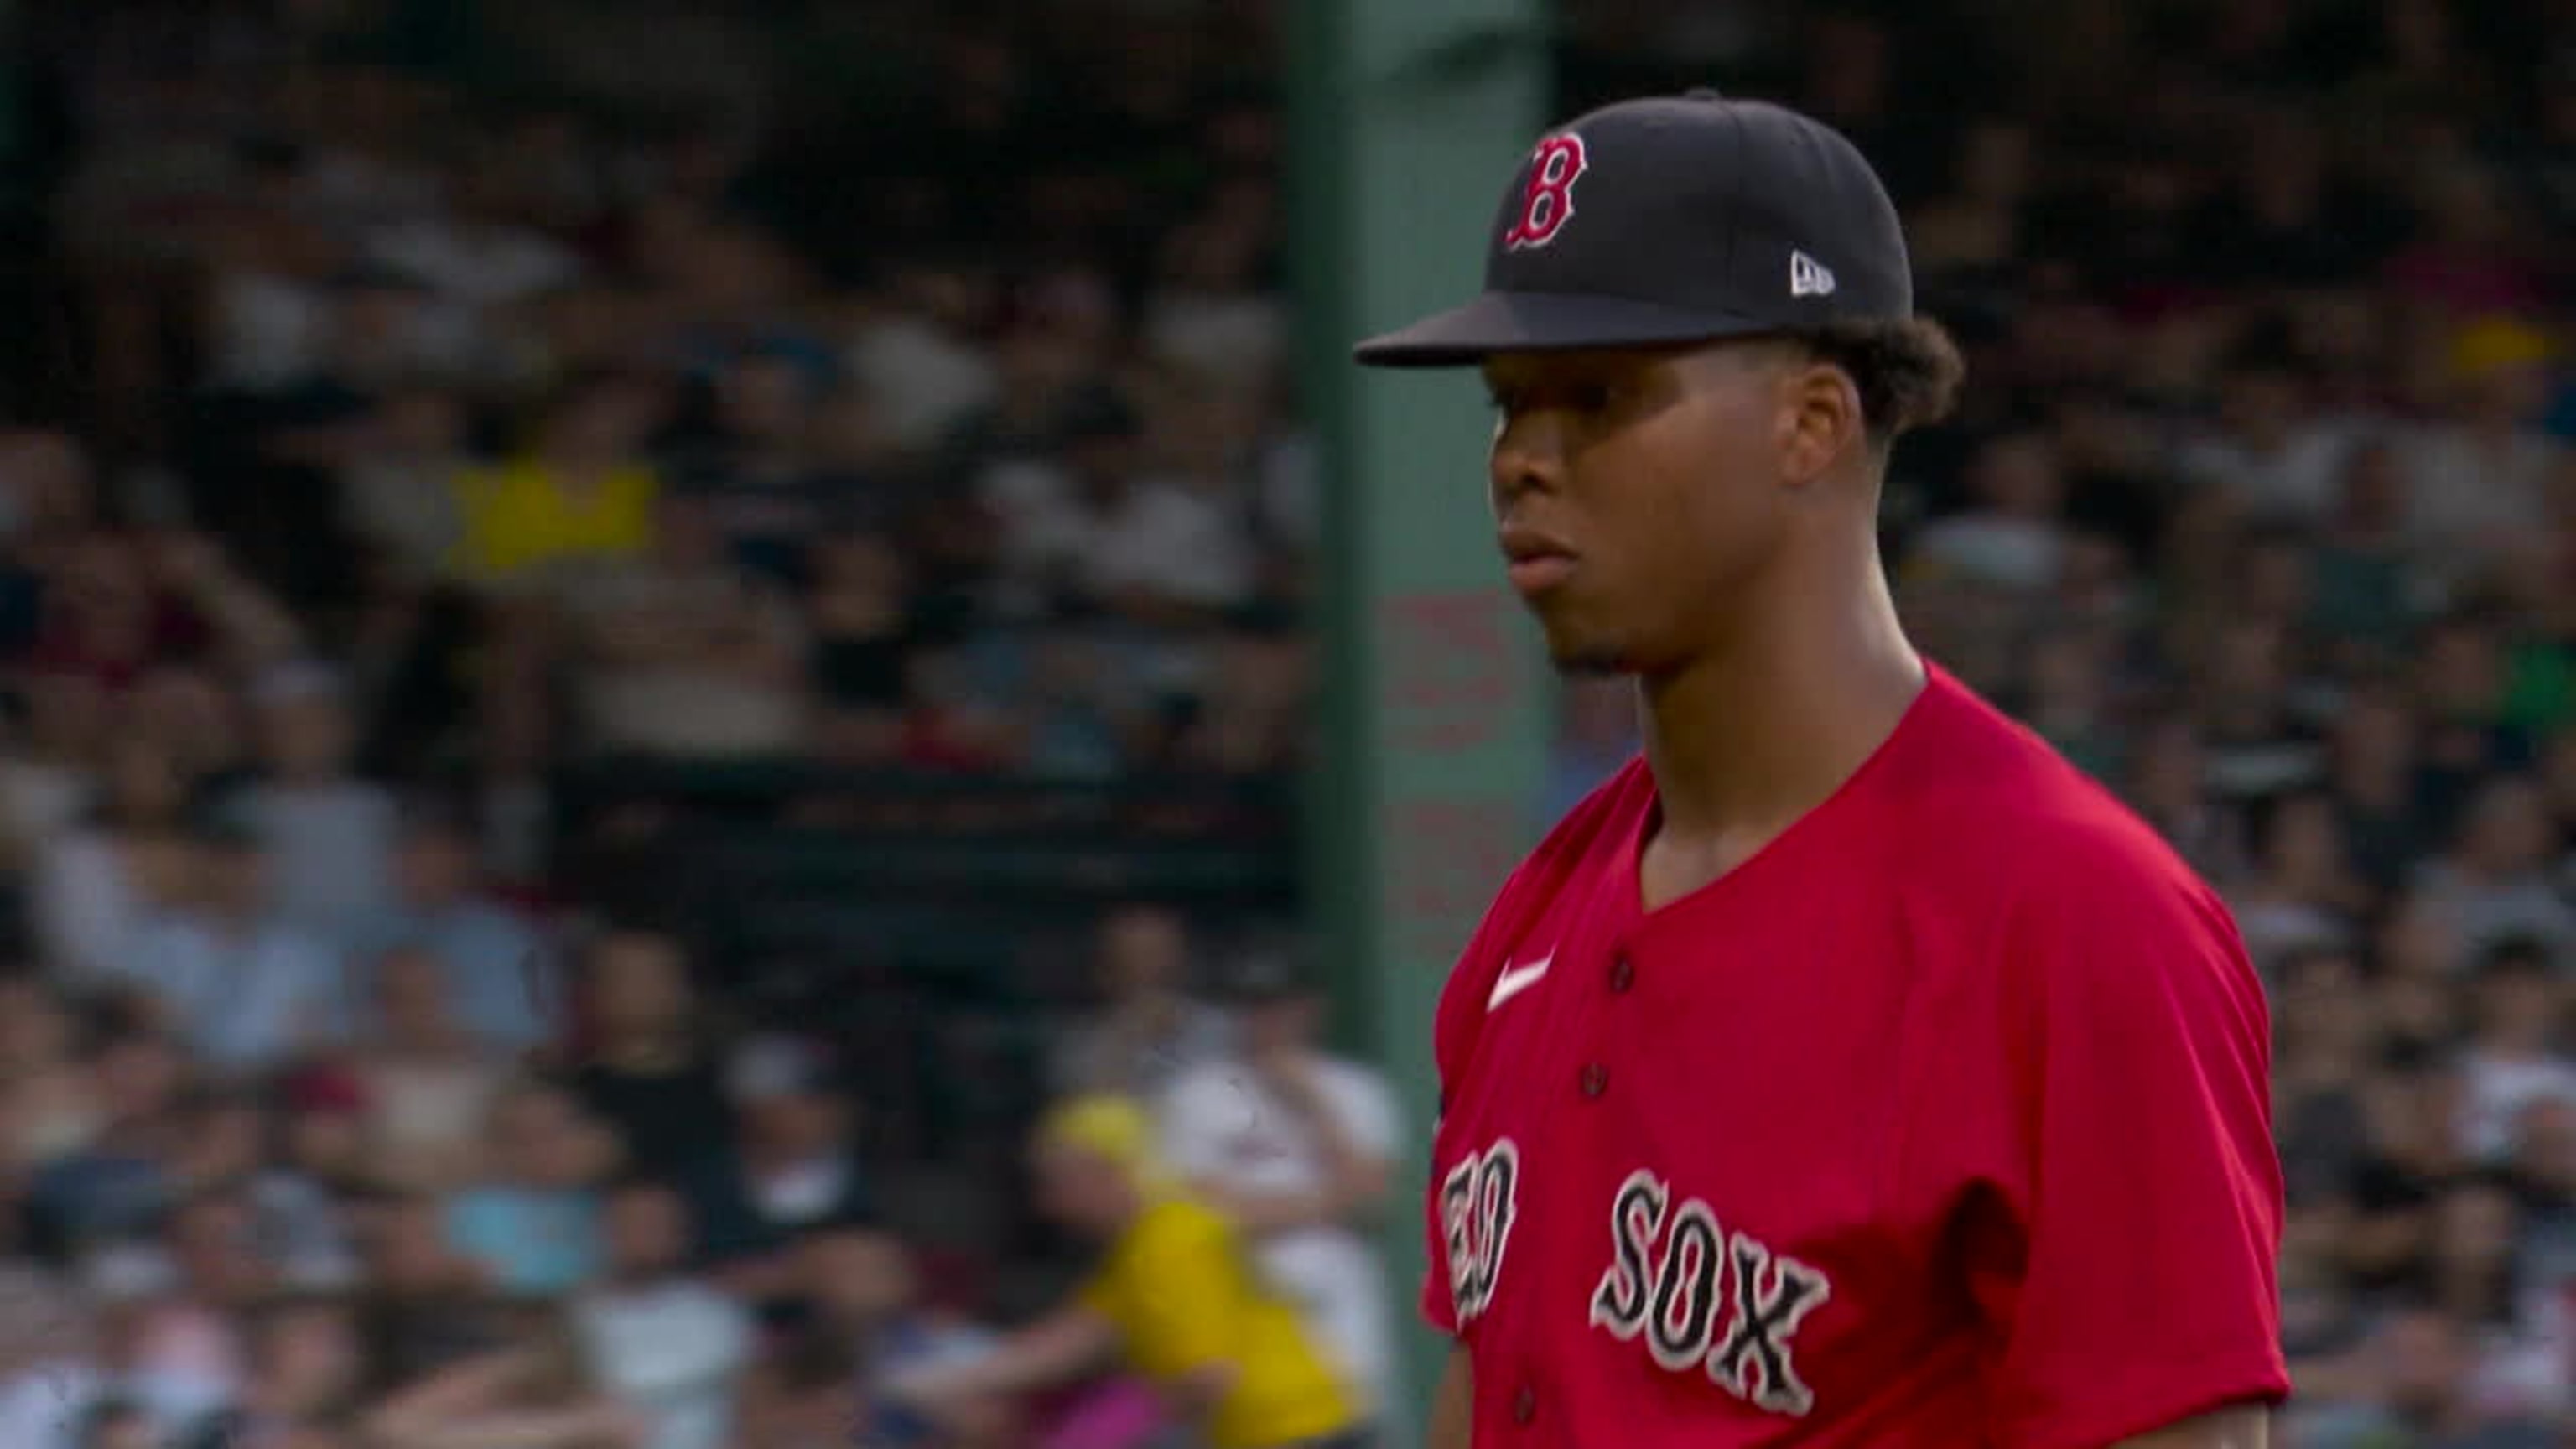 Red Sox pounded by Yankees, limp into All-Star break - CBS Boston